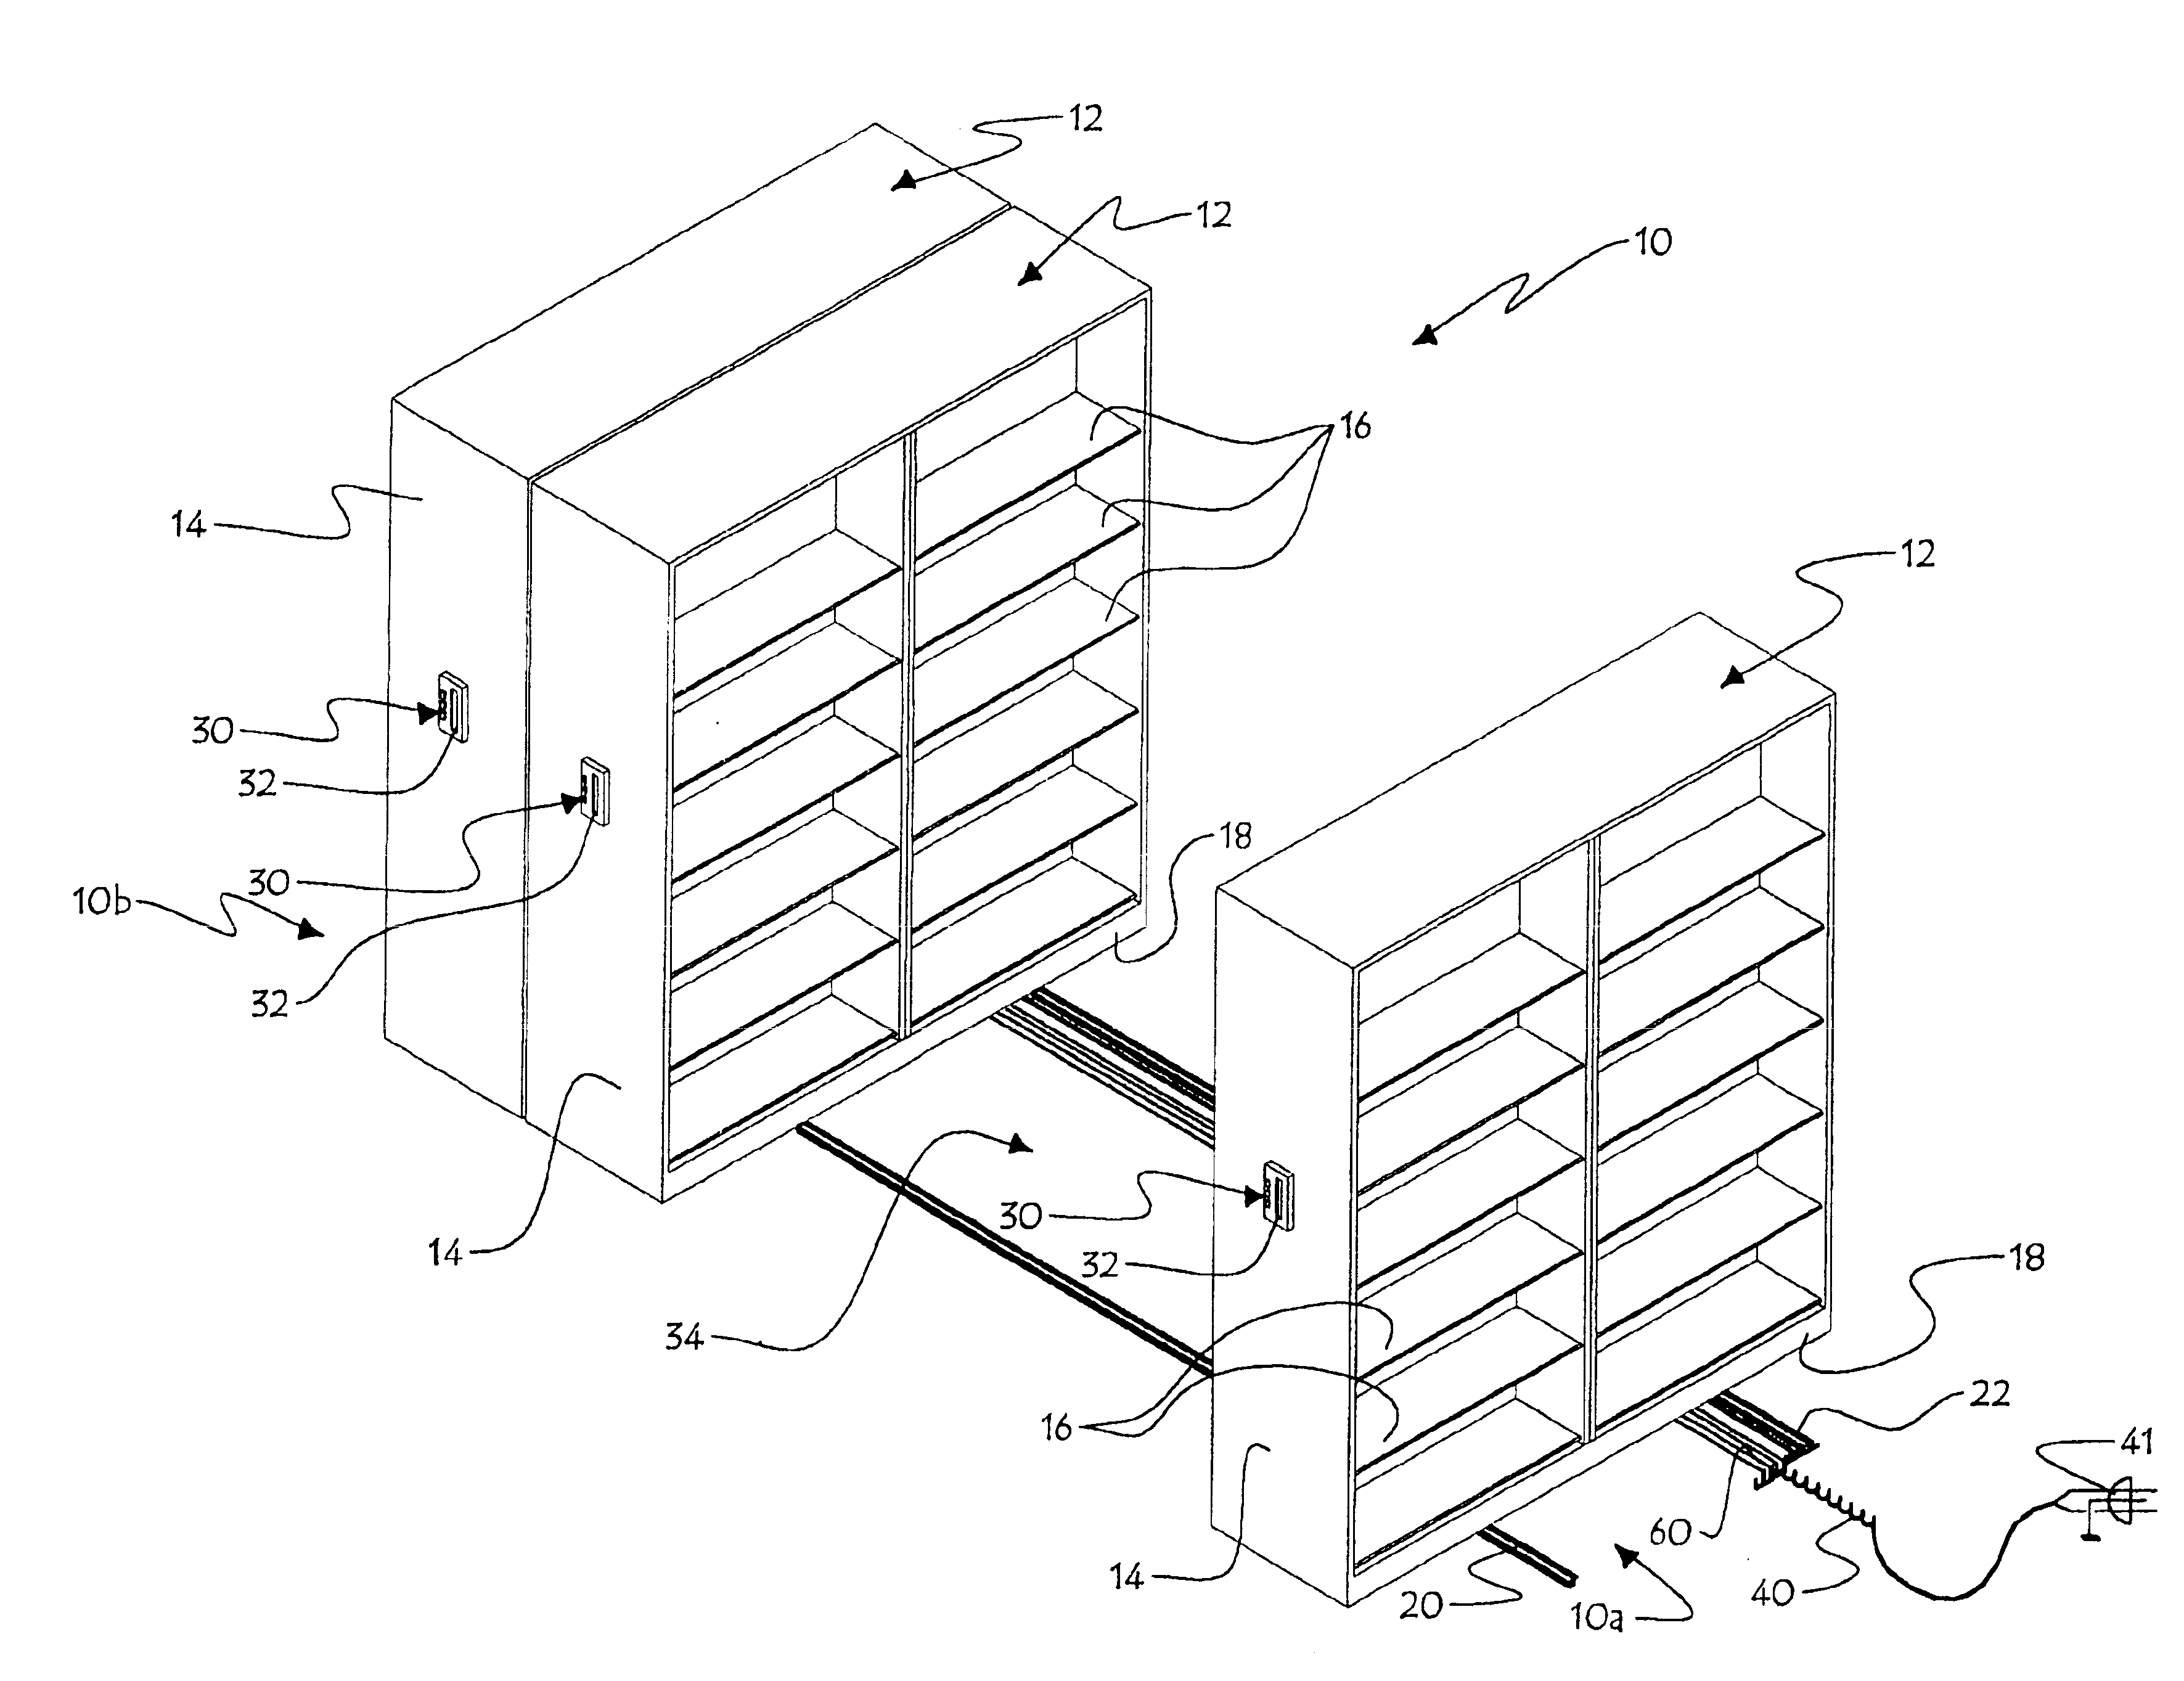 Ground embedded wire tracks for a shelving system having mobile shelf units